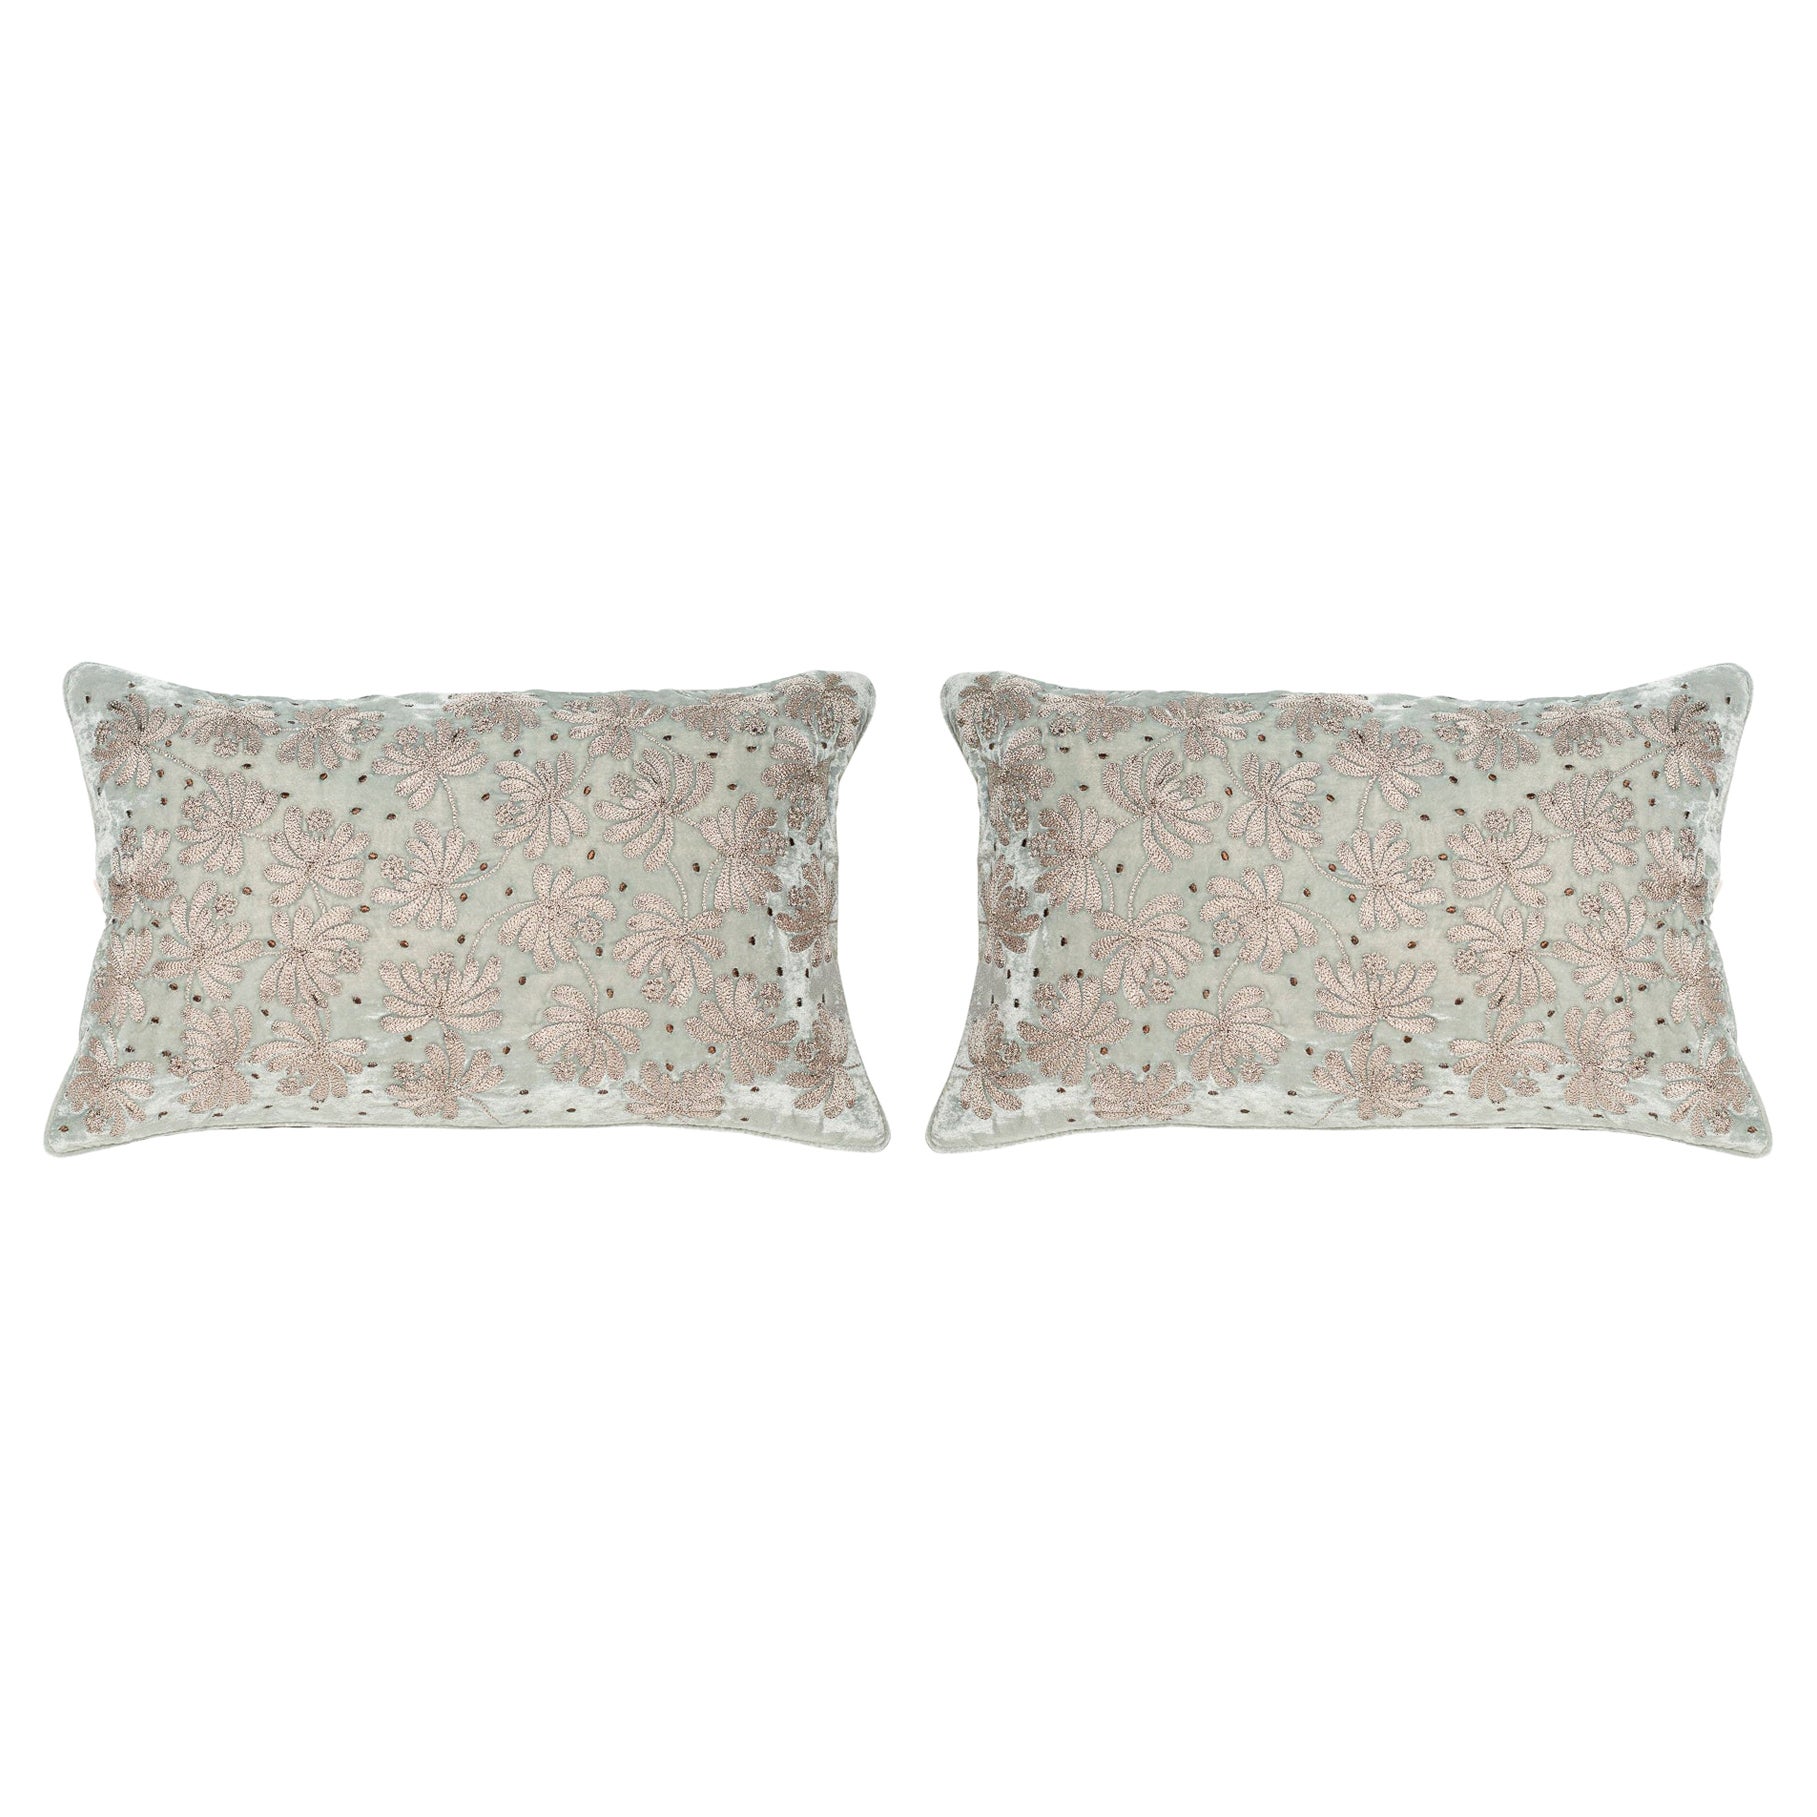 Contemporary Pair of Light Blue Silk Velvet Pillow with Metallic Embroidery